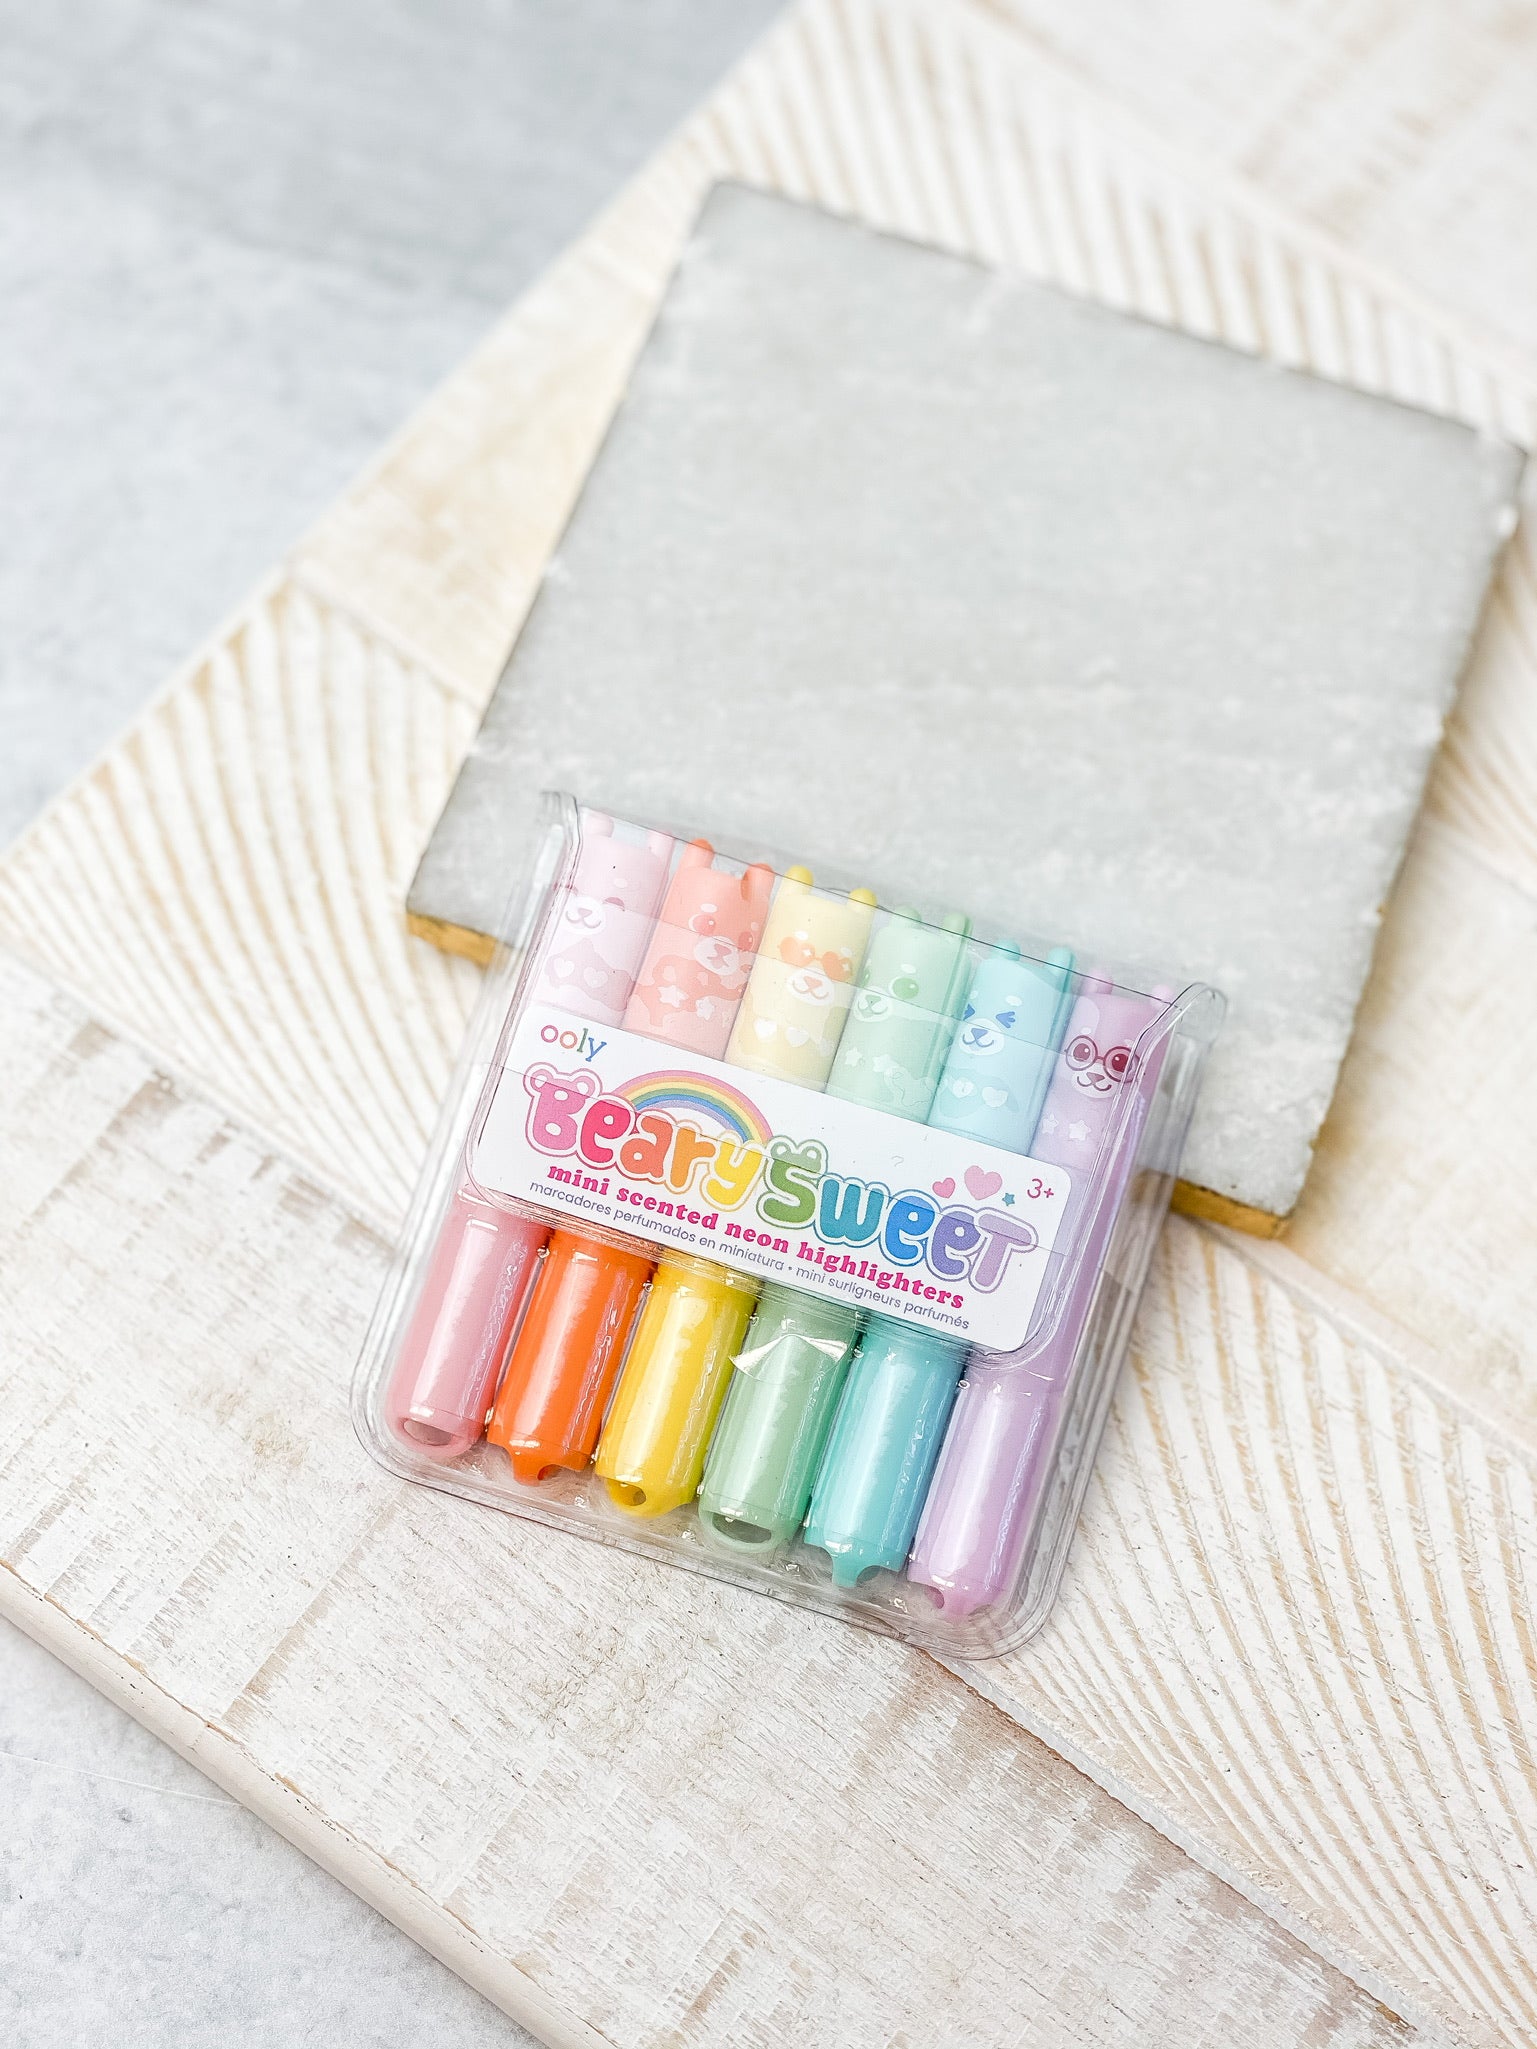 Ooly Beary Sweet Mini Scented Highlighters